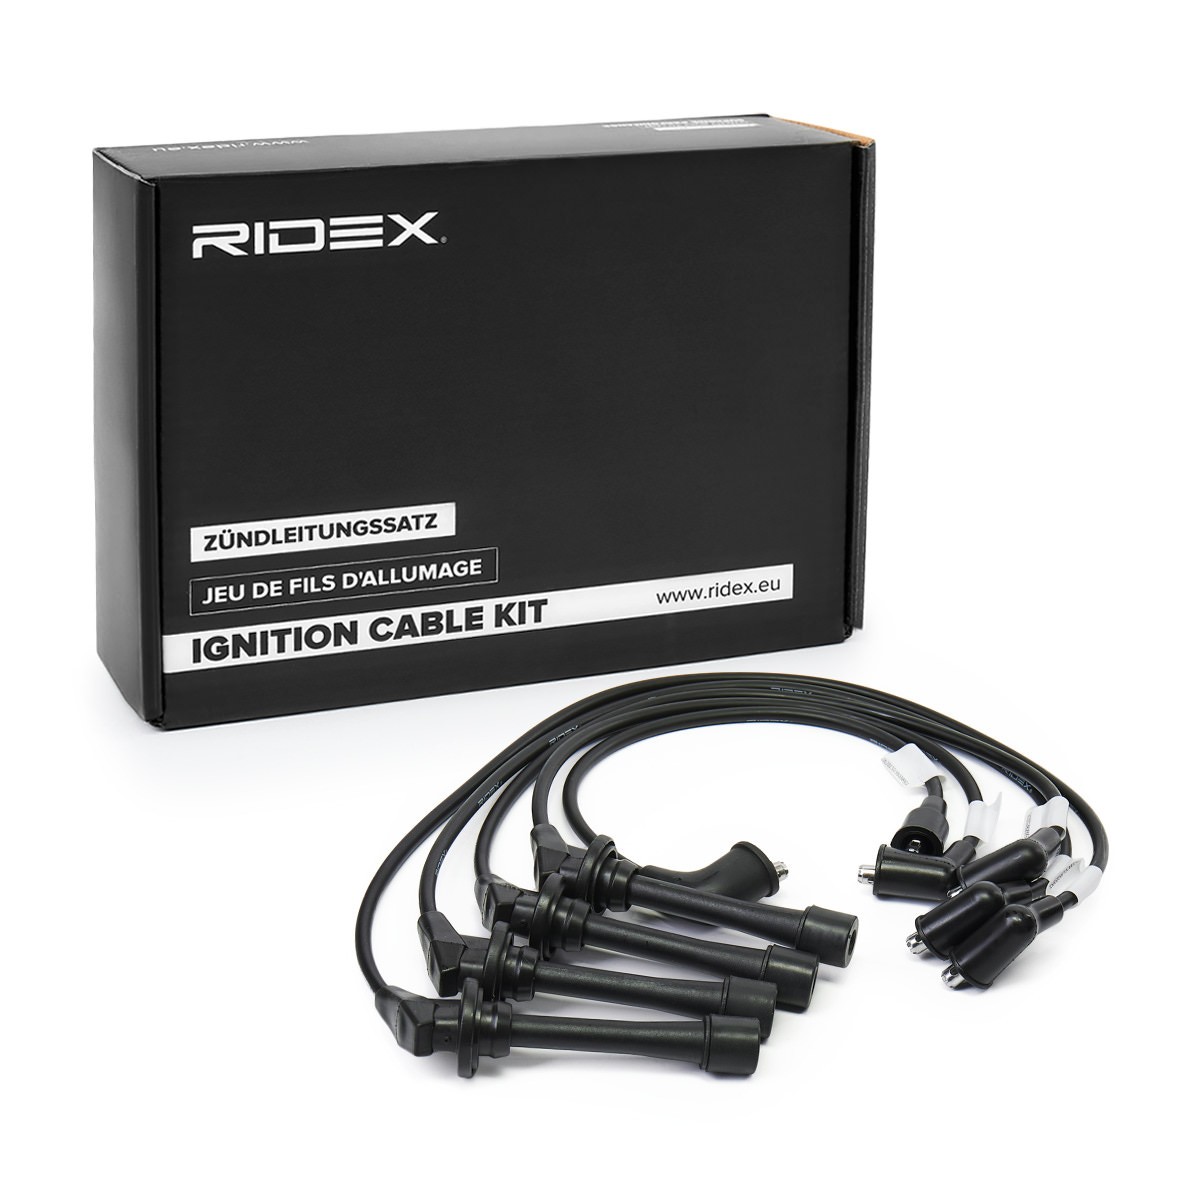 RIDEX 685I0159 Ignition Cable Kit Number of circuits: 5